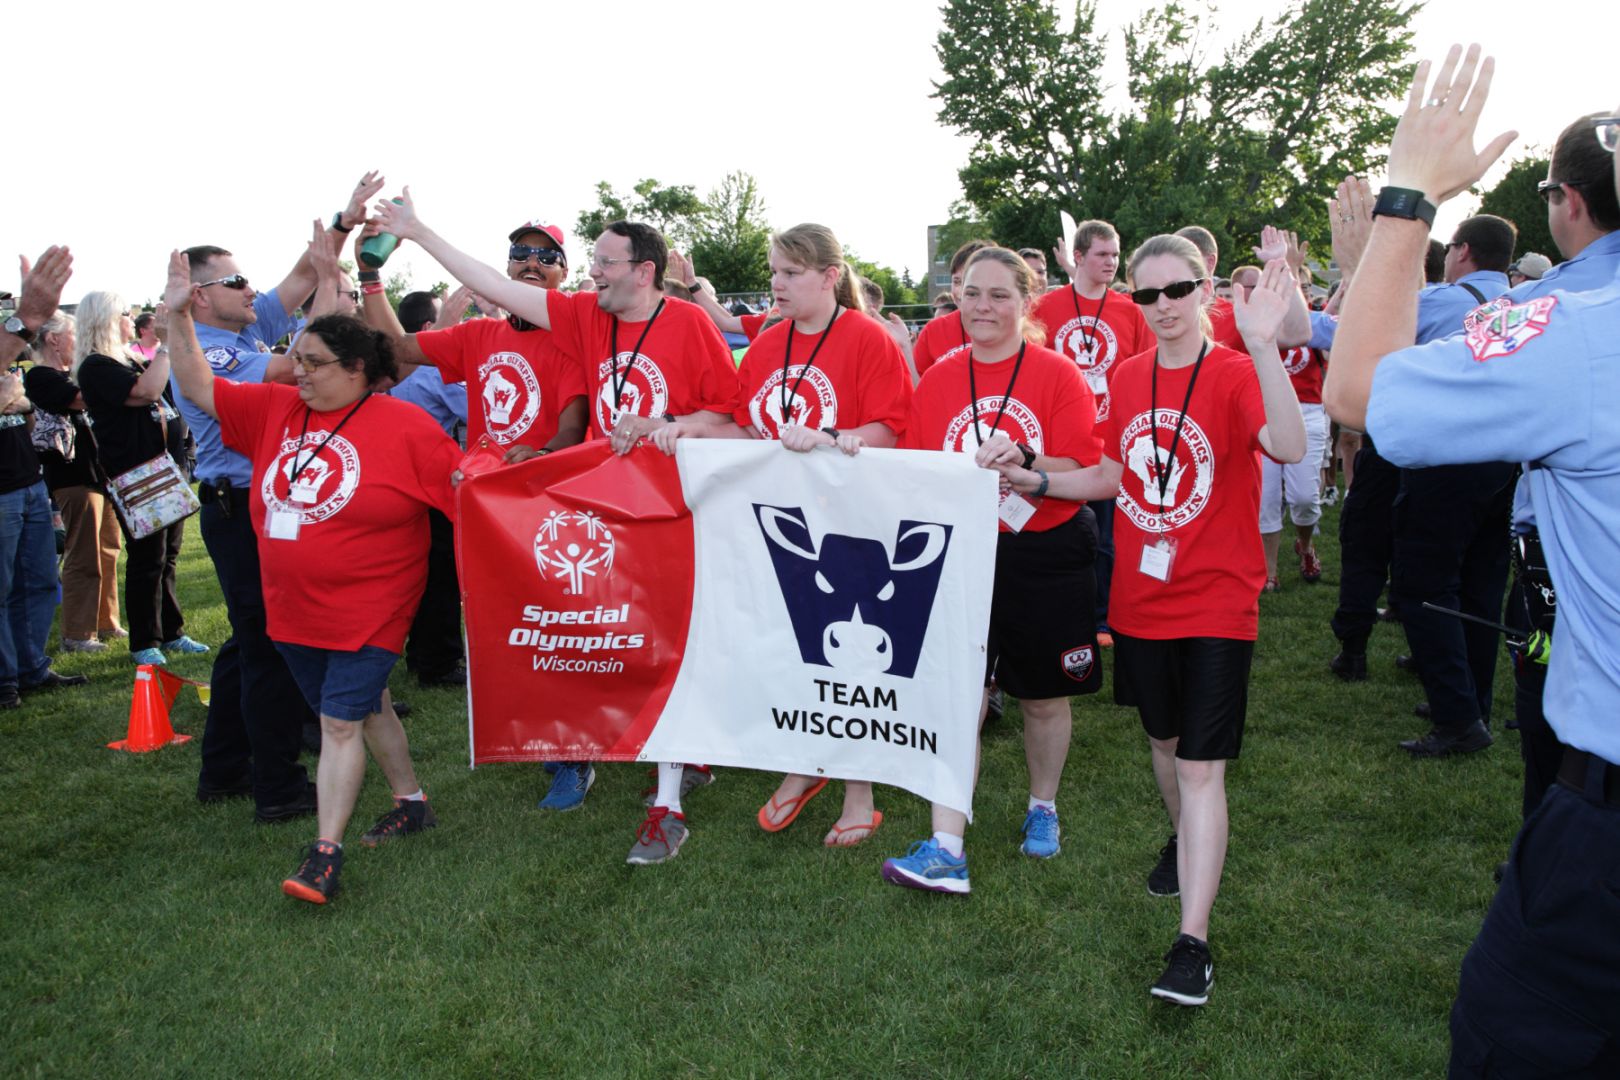 (Team Wisconsin at the Summer Games Parade of Athletes)